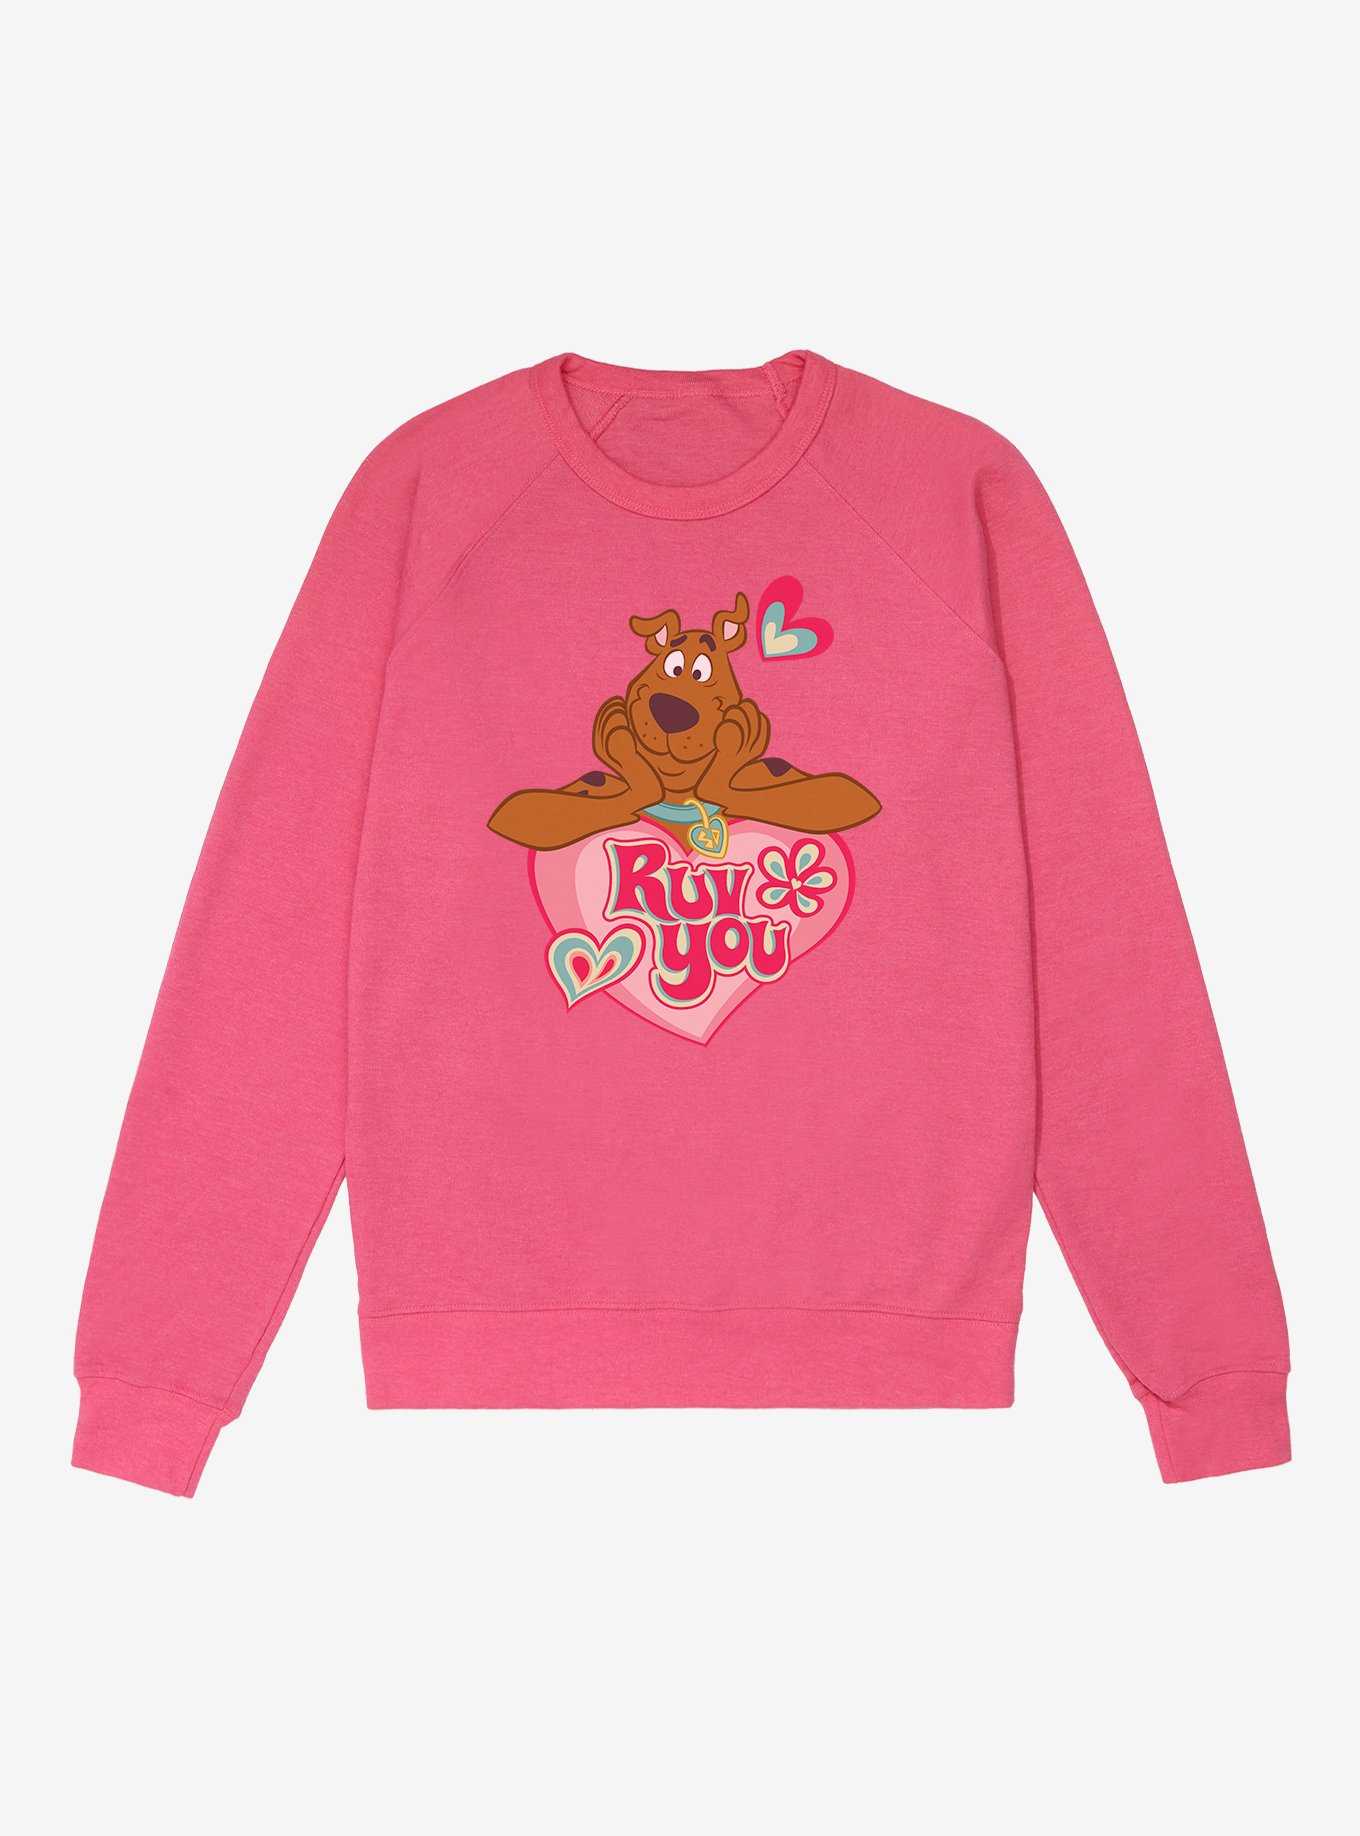 OFFICIAL Scooby-Doo Hoodies & Sweaters | BoxLunch Gifts | Sweatshirts